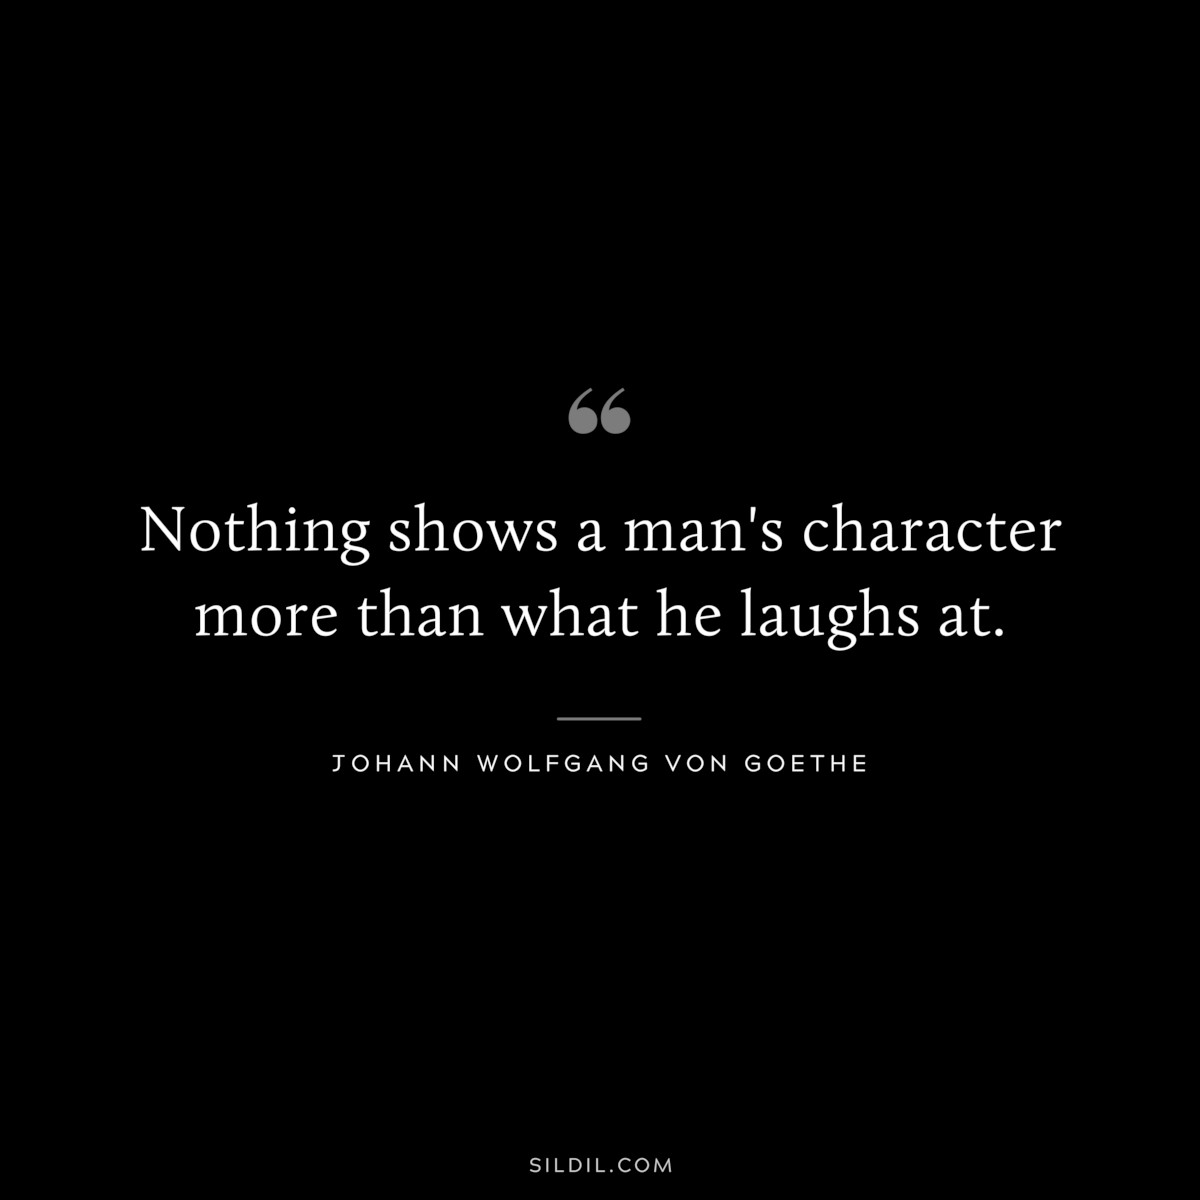 Nothing shows a man's character more than what he laughs at.― Johann Wolfgang von Goethe